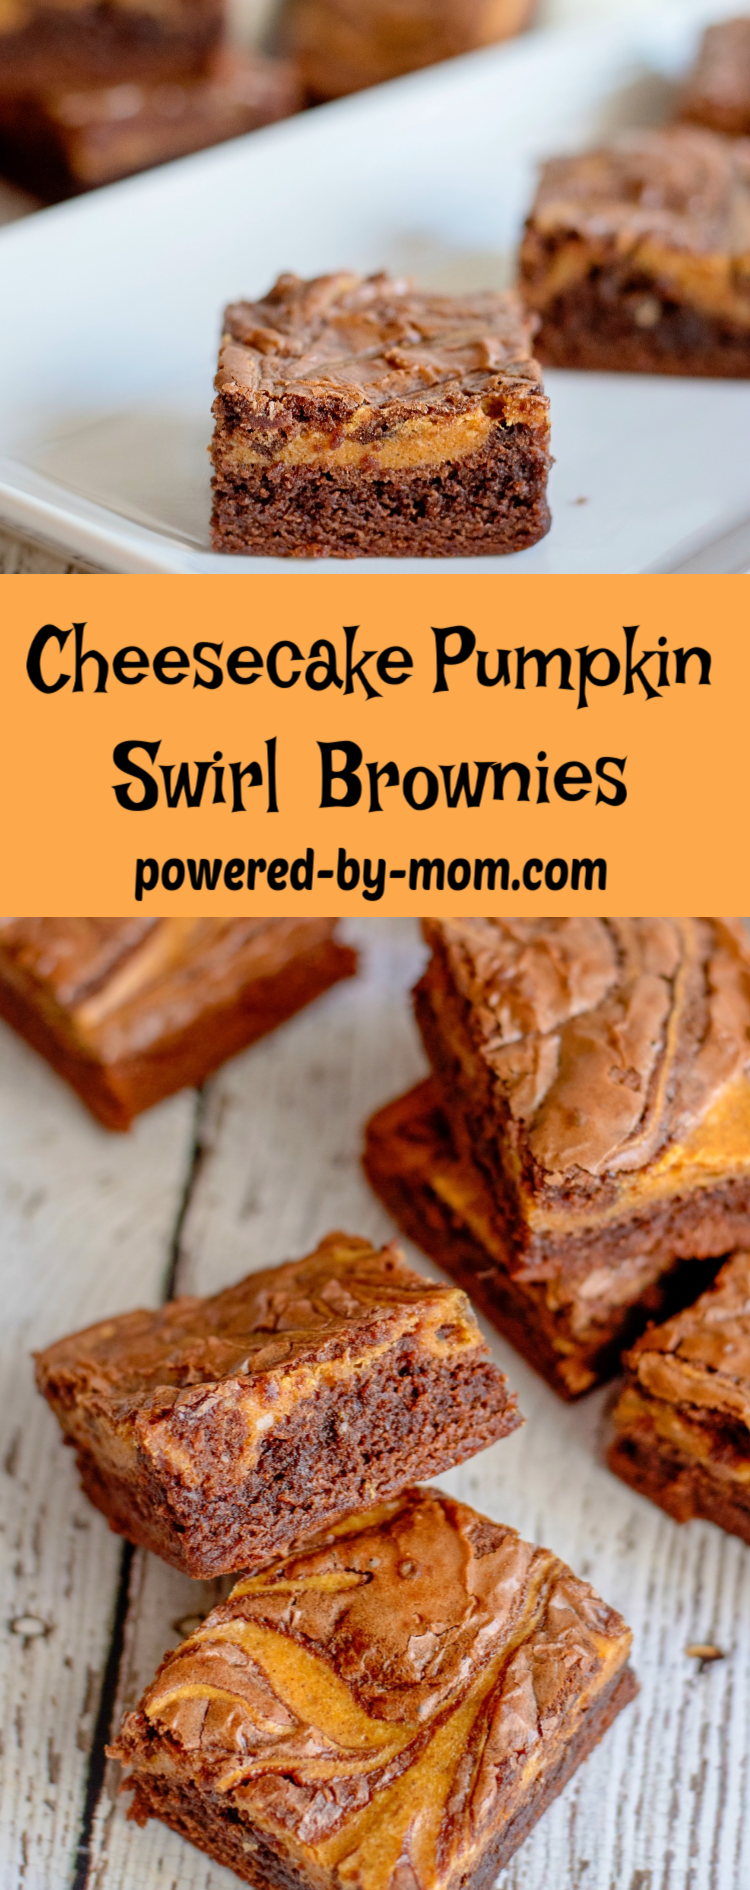 Pumpkin Swirl Cheesecake Brownie These Pumpkin Swirl Cheesecake Brownies are a perfect combination of boxed brownies with a homemade pumpkin cheesecake swirl that saves time but delivers an amazing flavor!